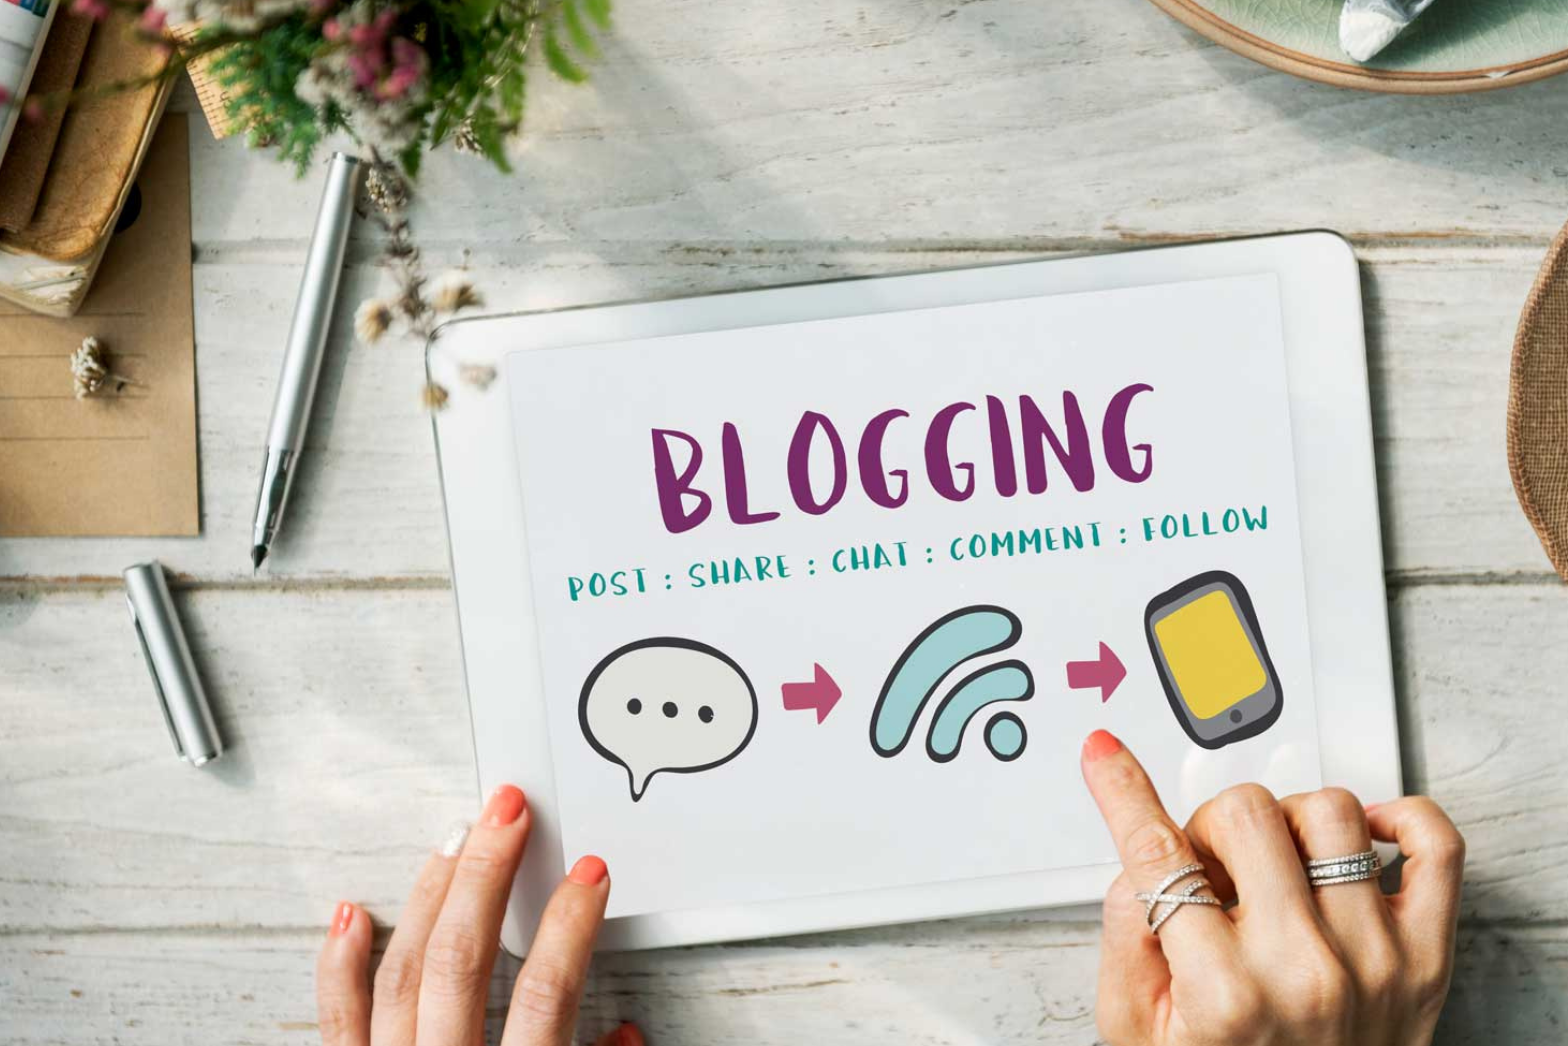 Why Is Blogging So Important in Digital Marketing?